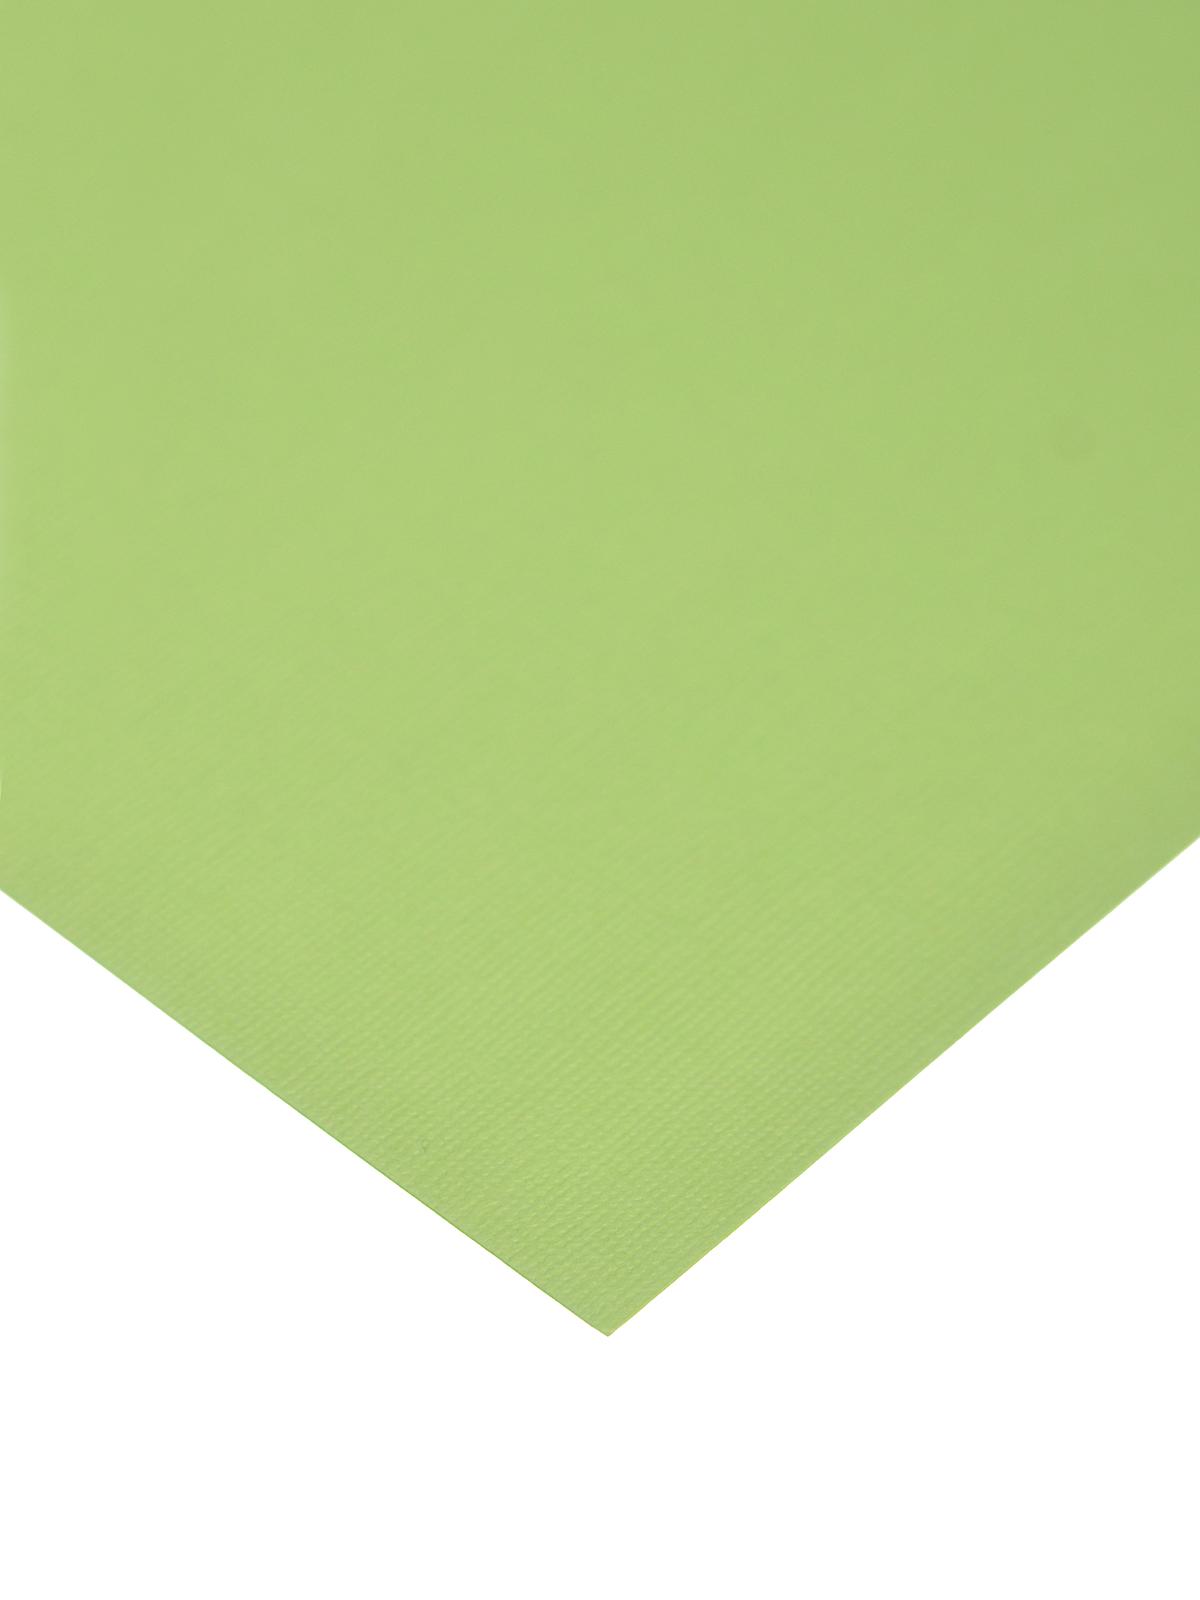 80 Lb. Canvas 8.5 In. X 11 In. Sheet Lime Pop